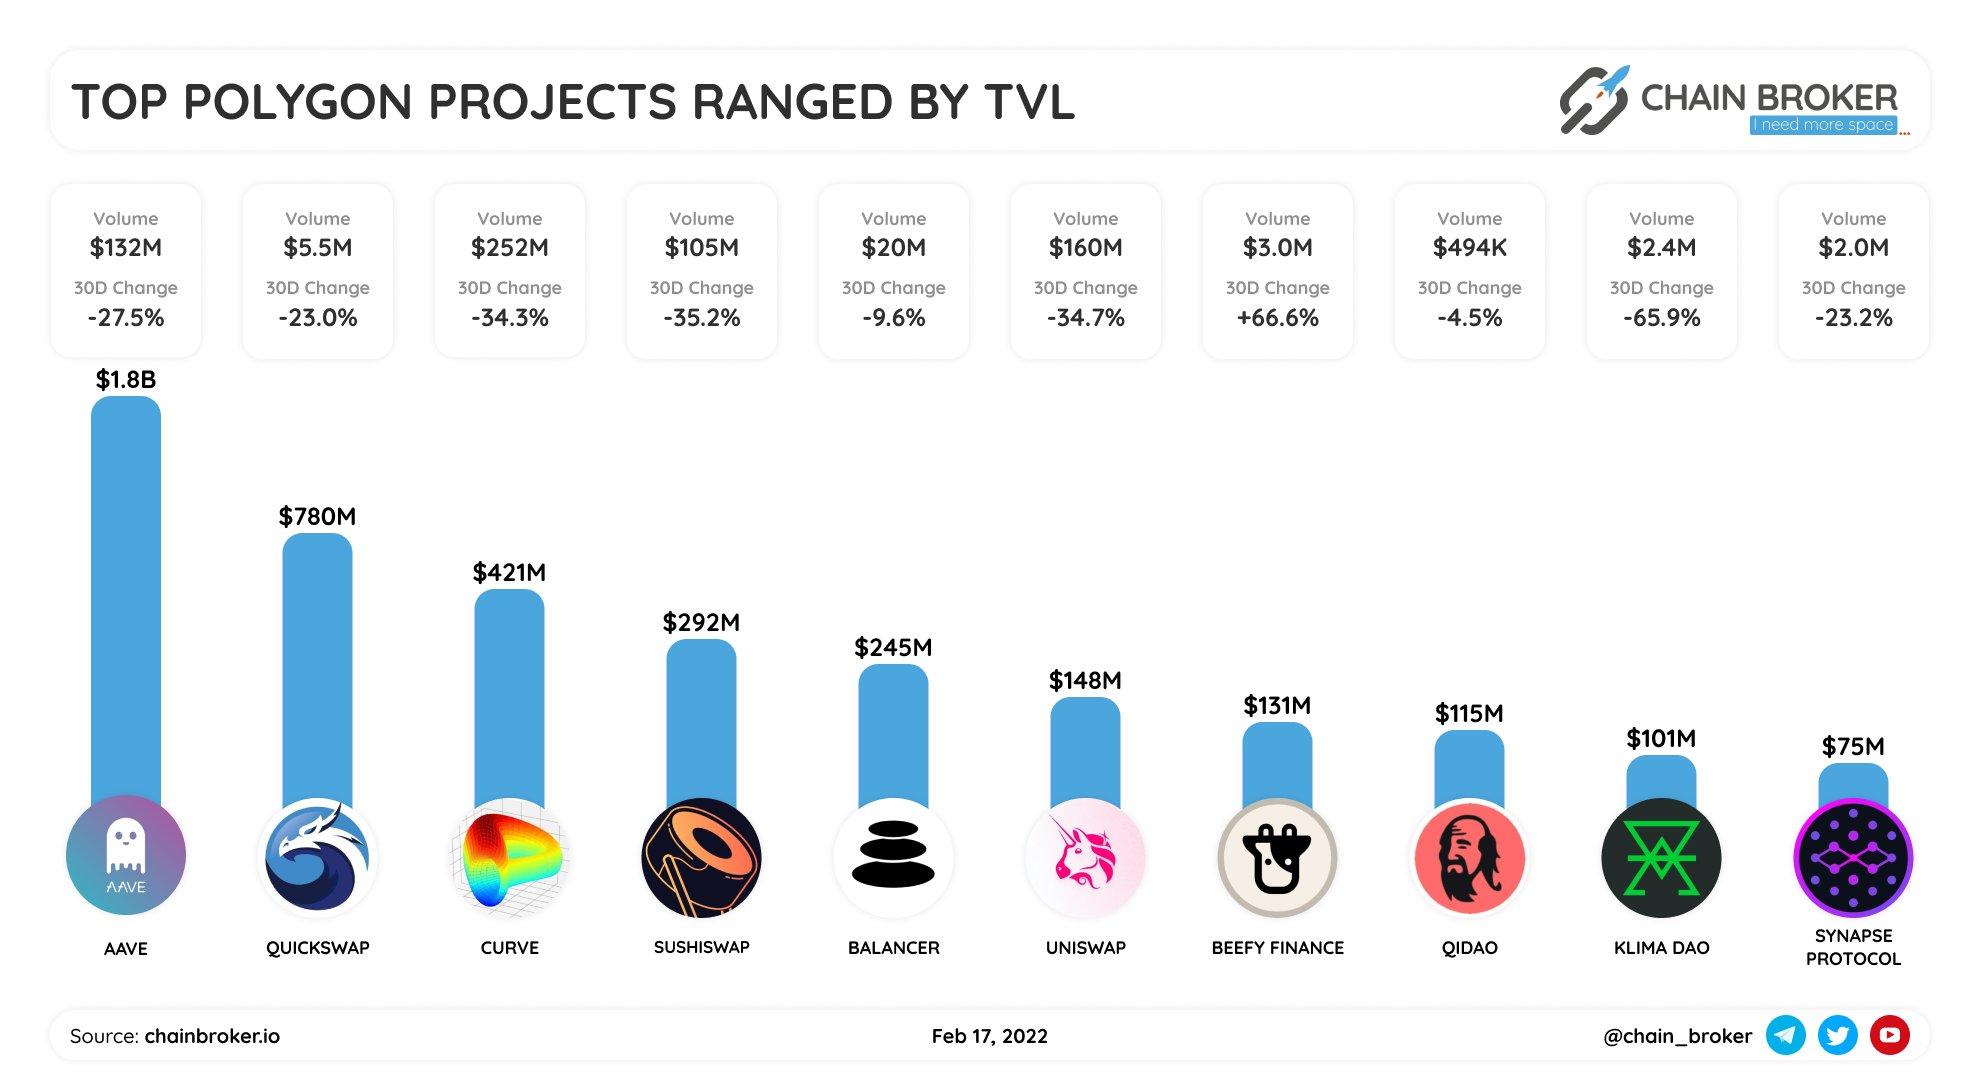 Top Polygon projects ranged by TVL